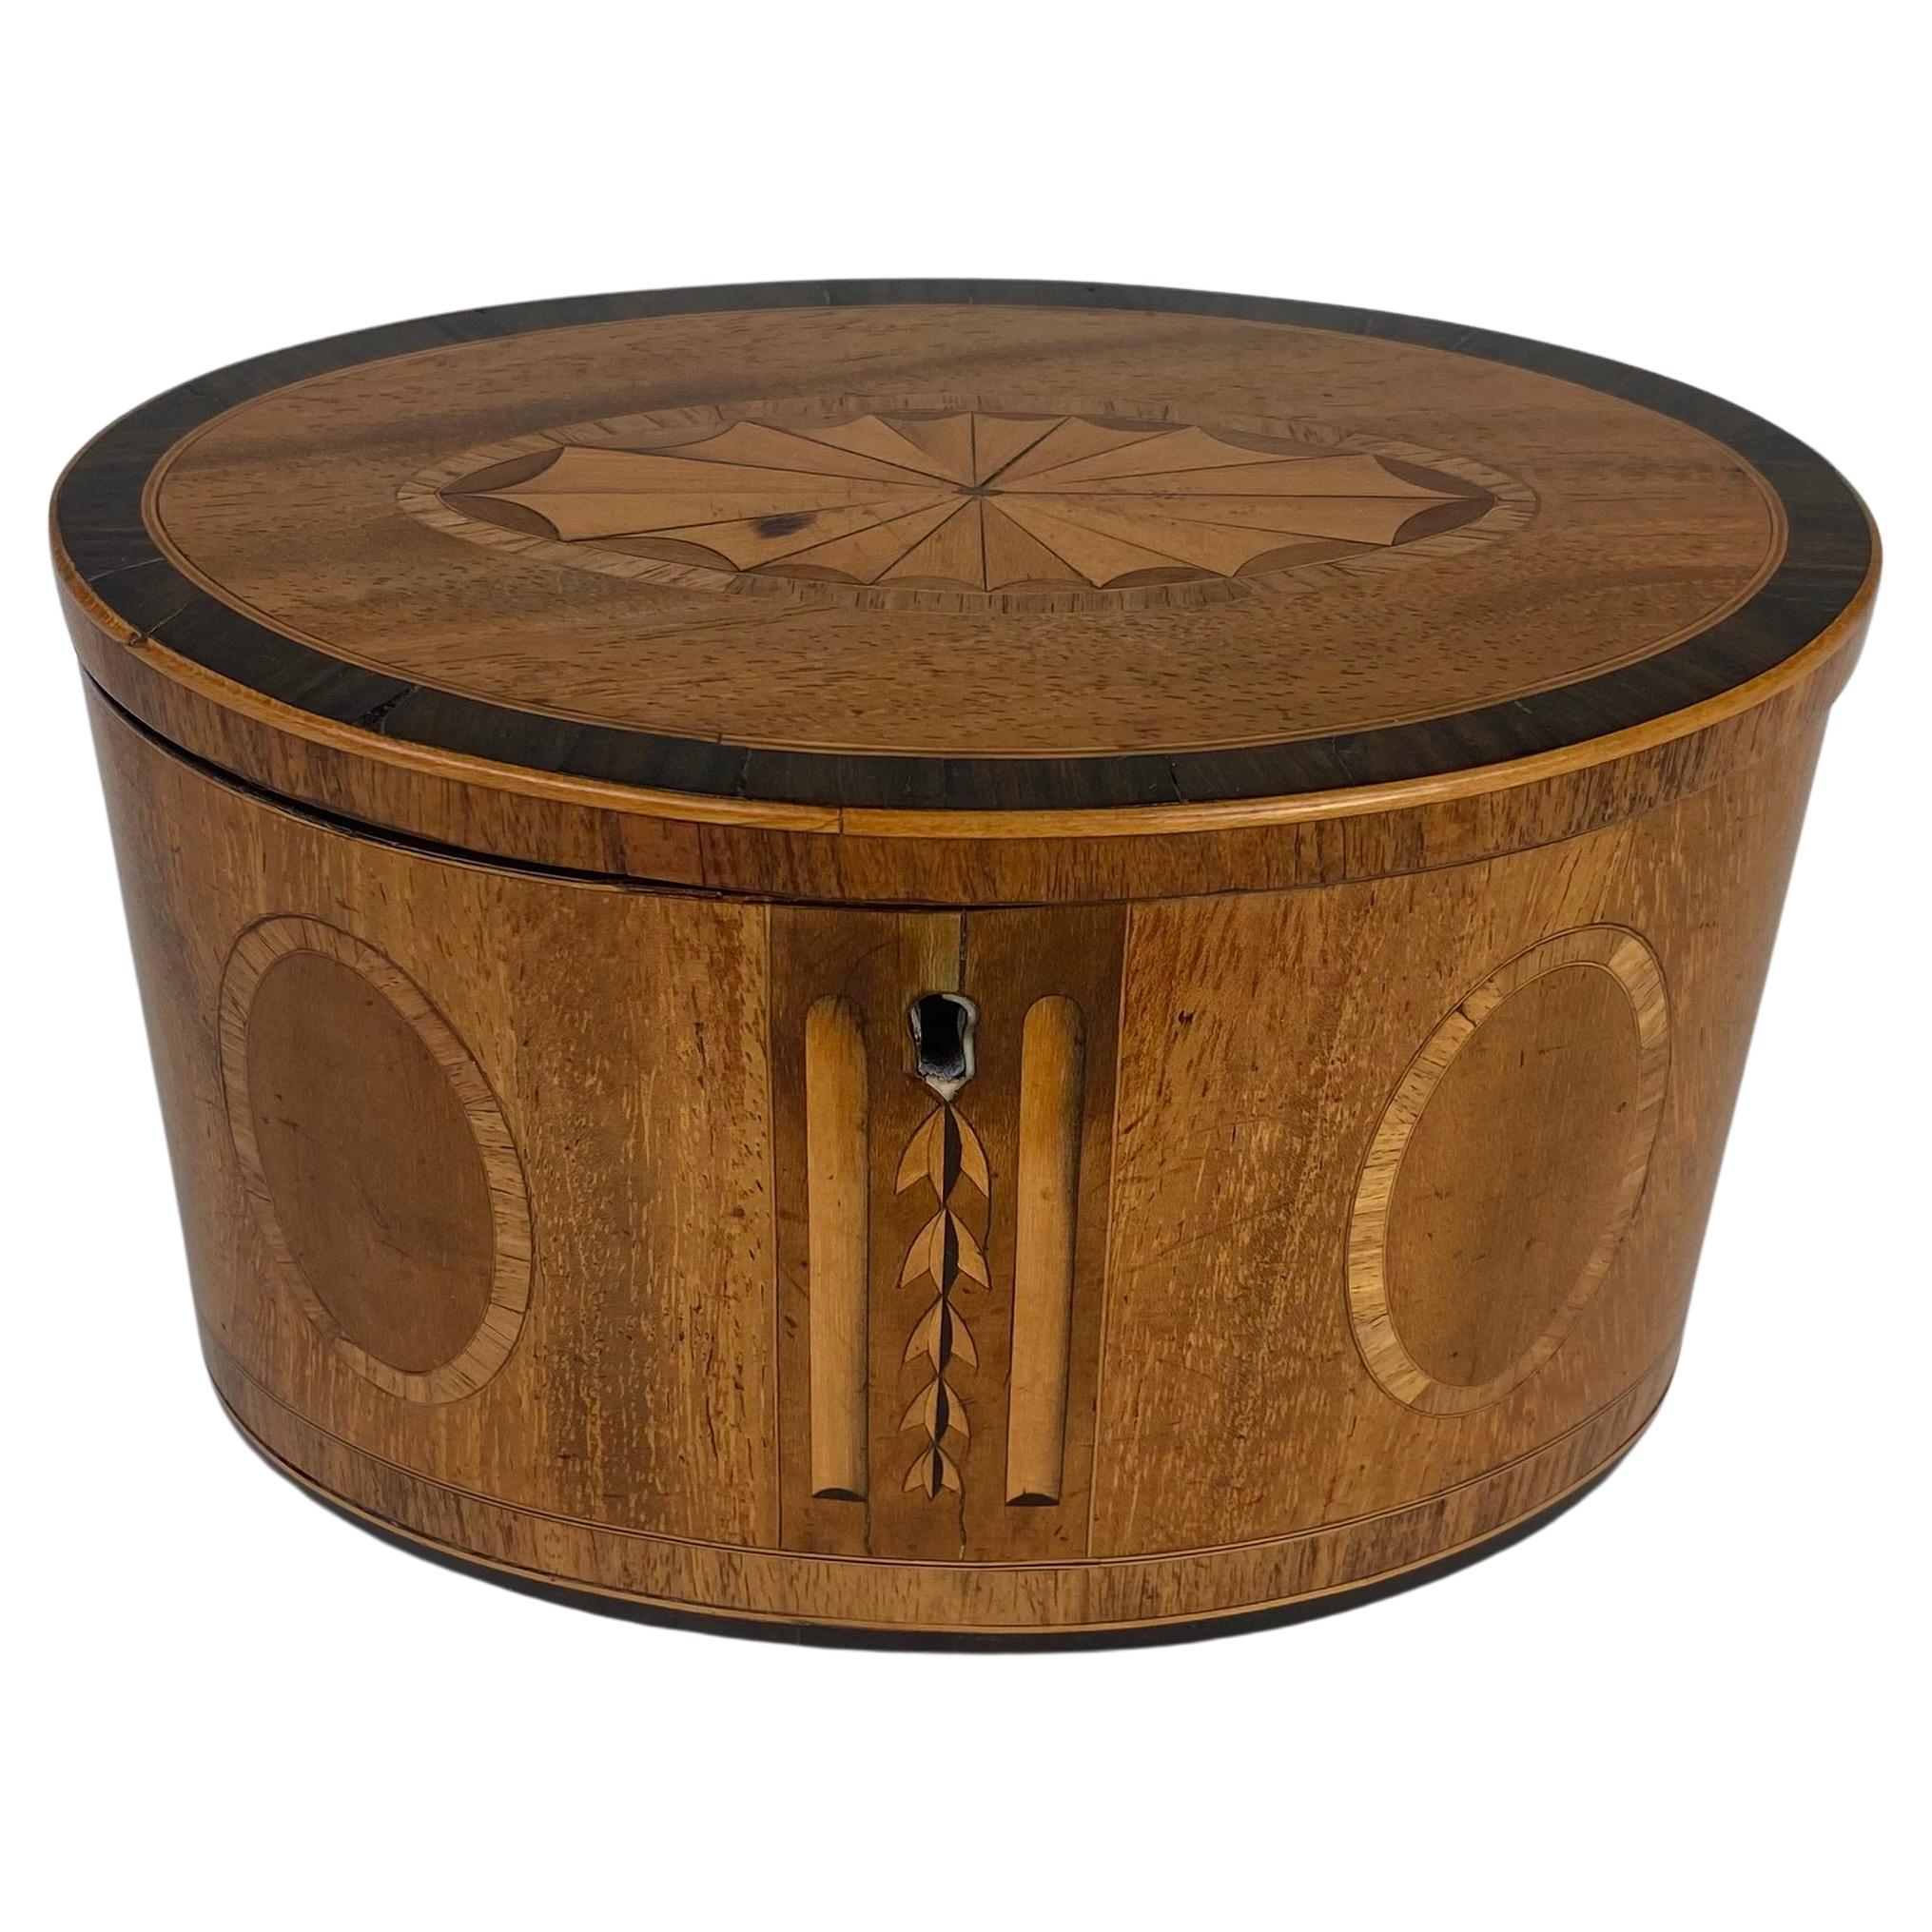 Oval Satinwood inlaid Tea Caddy For Sale